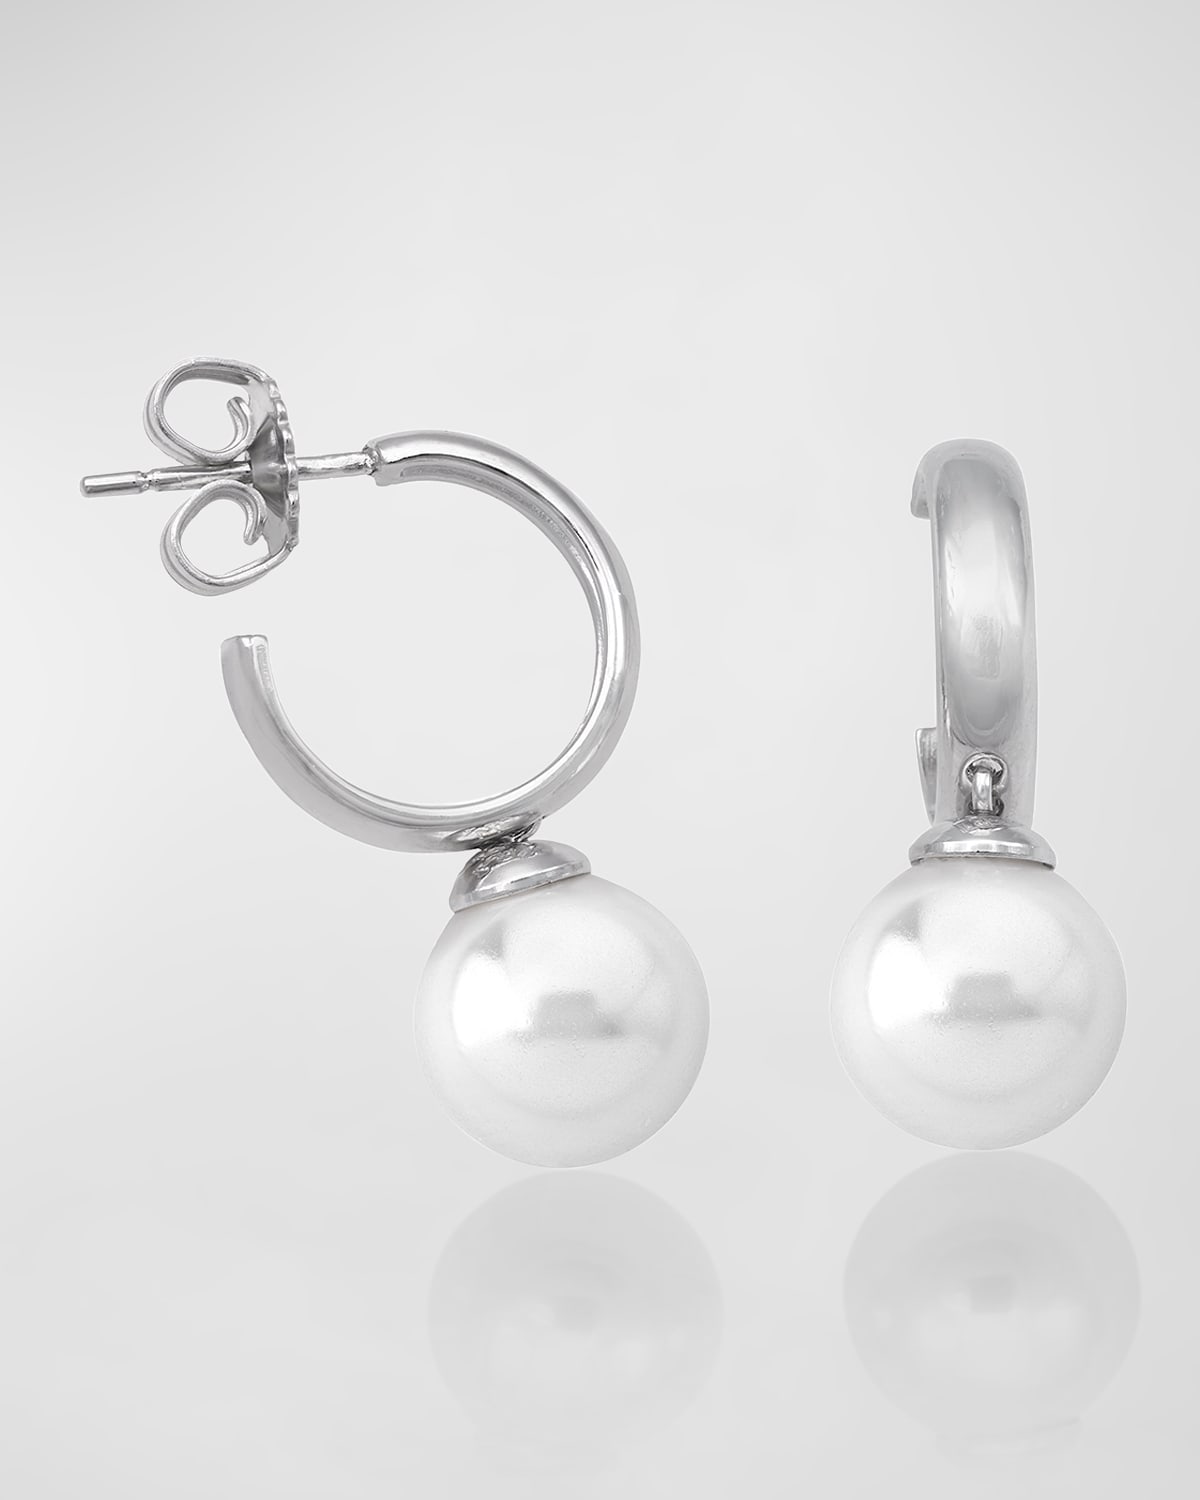 Nudo Pearl Earrings with French Wire Knot